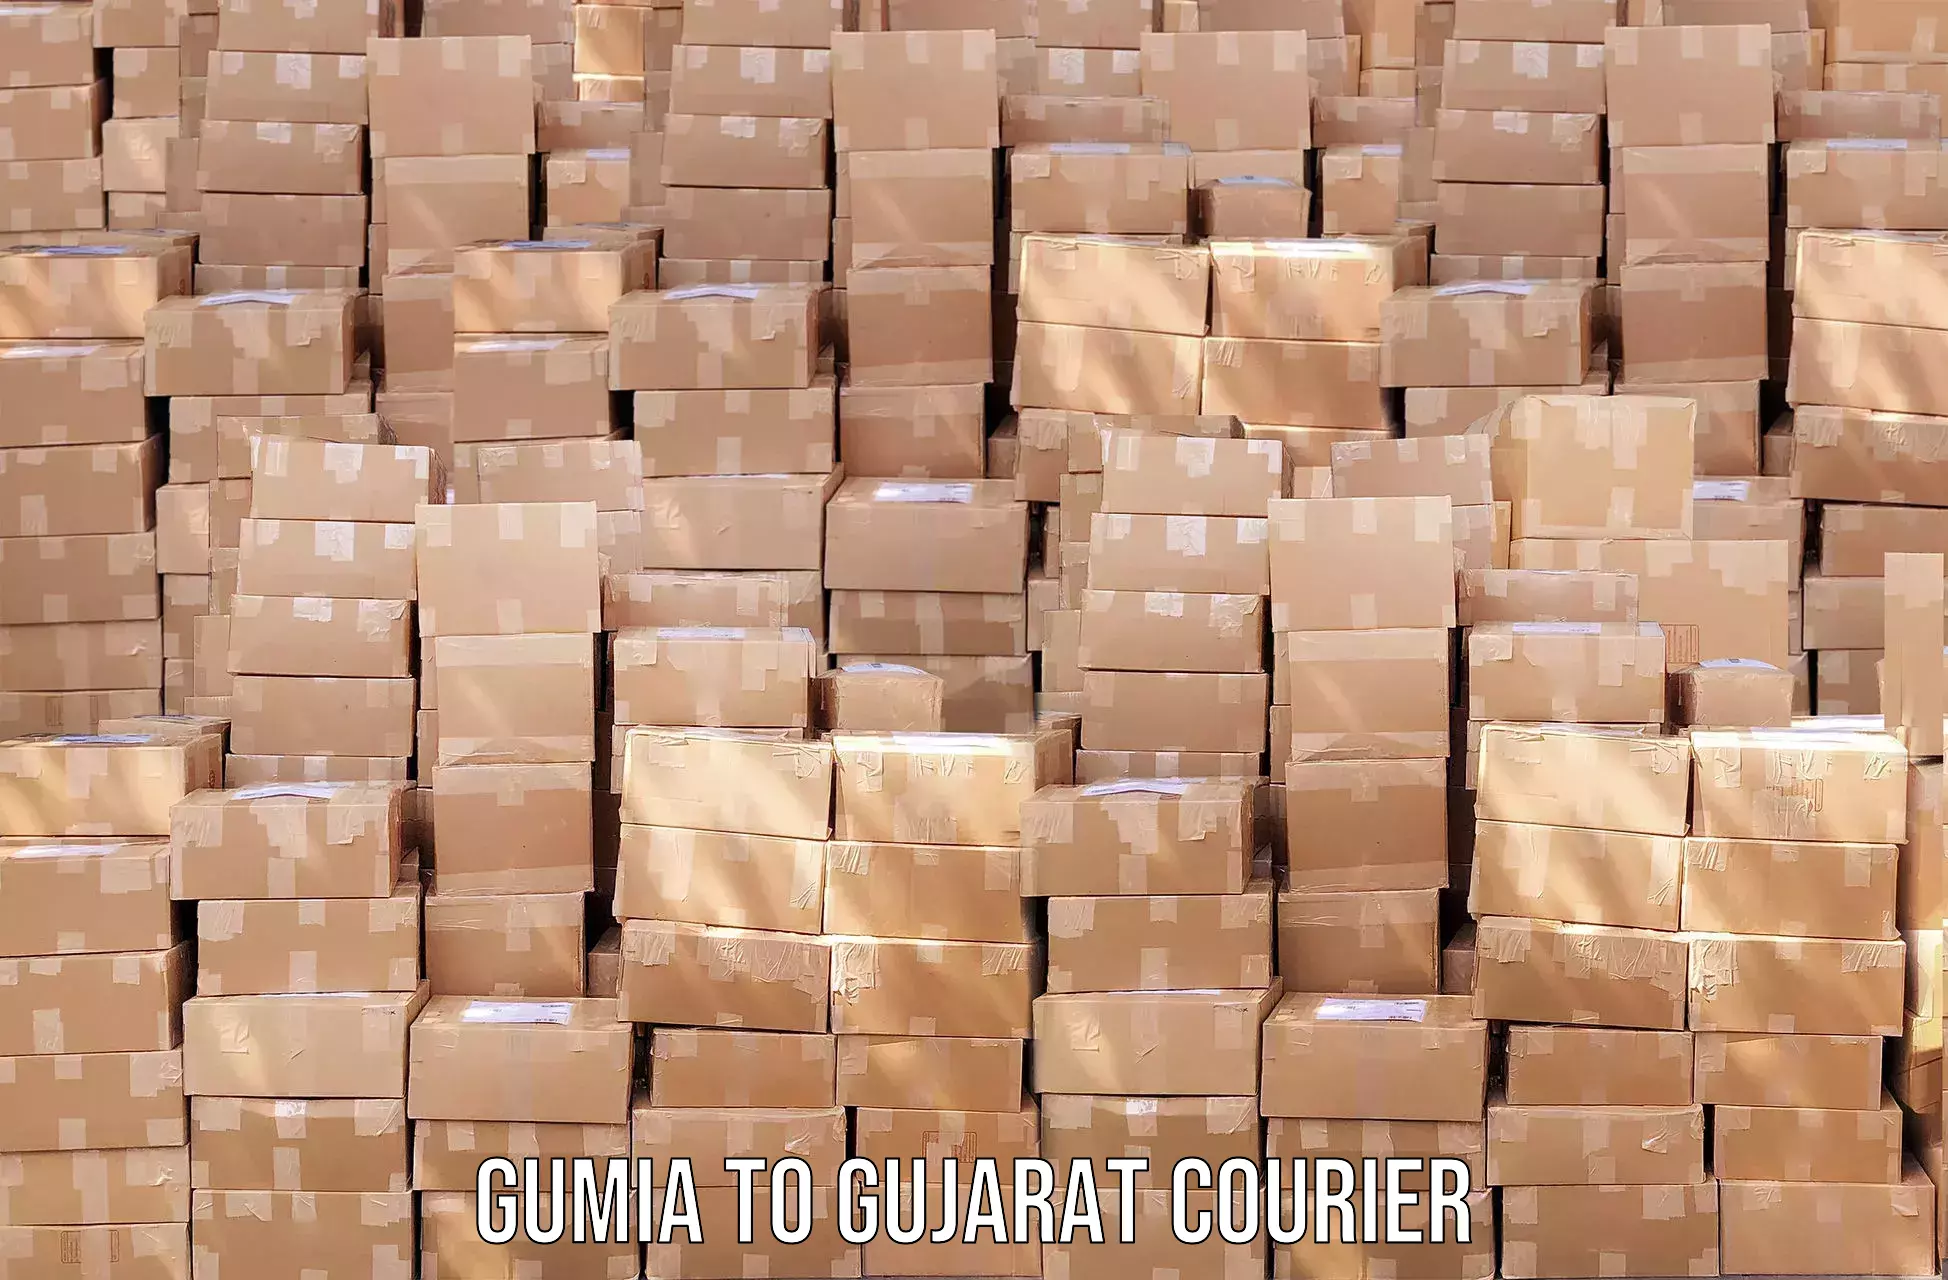 Cash on delivery service Gumia to Gujarat